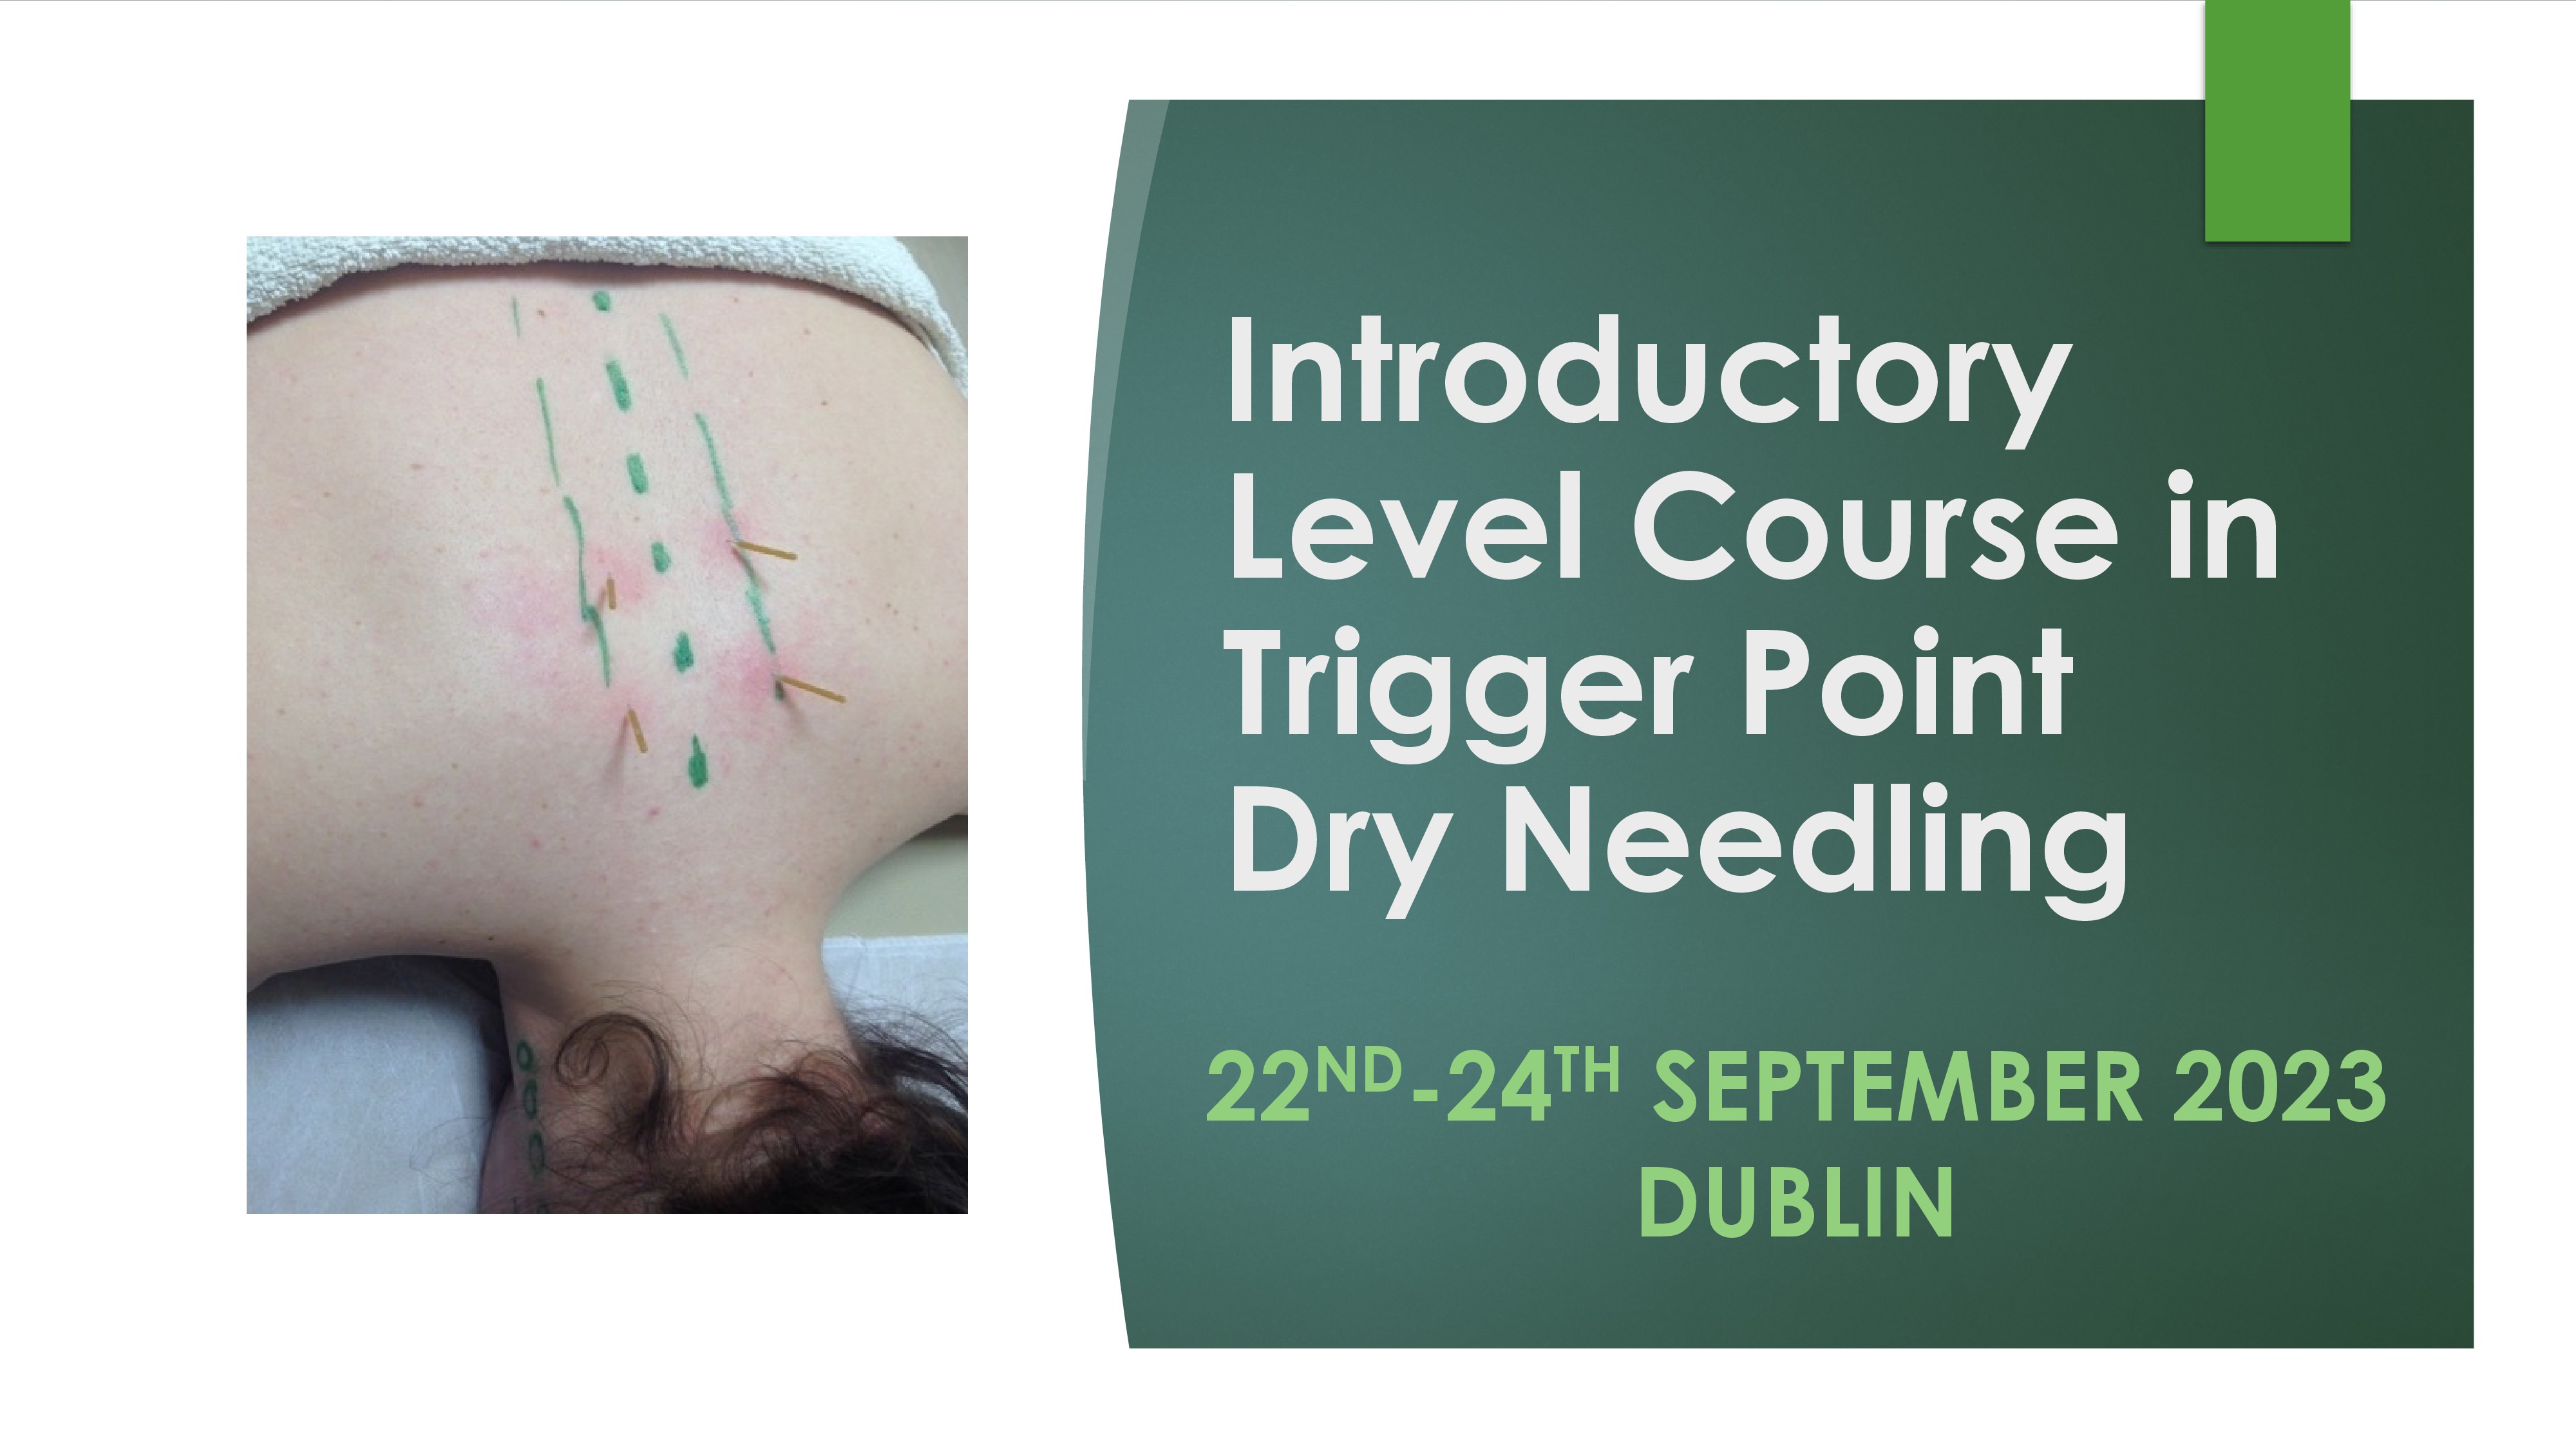 Introductory Level Trigger Point Dry Needling 22nd-24th September 2023, DUBLIN